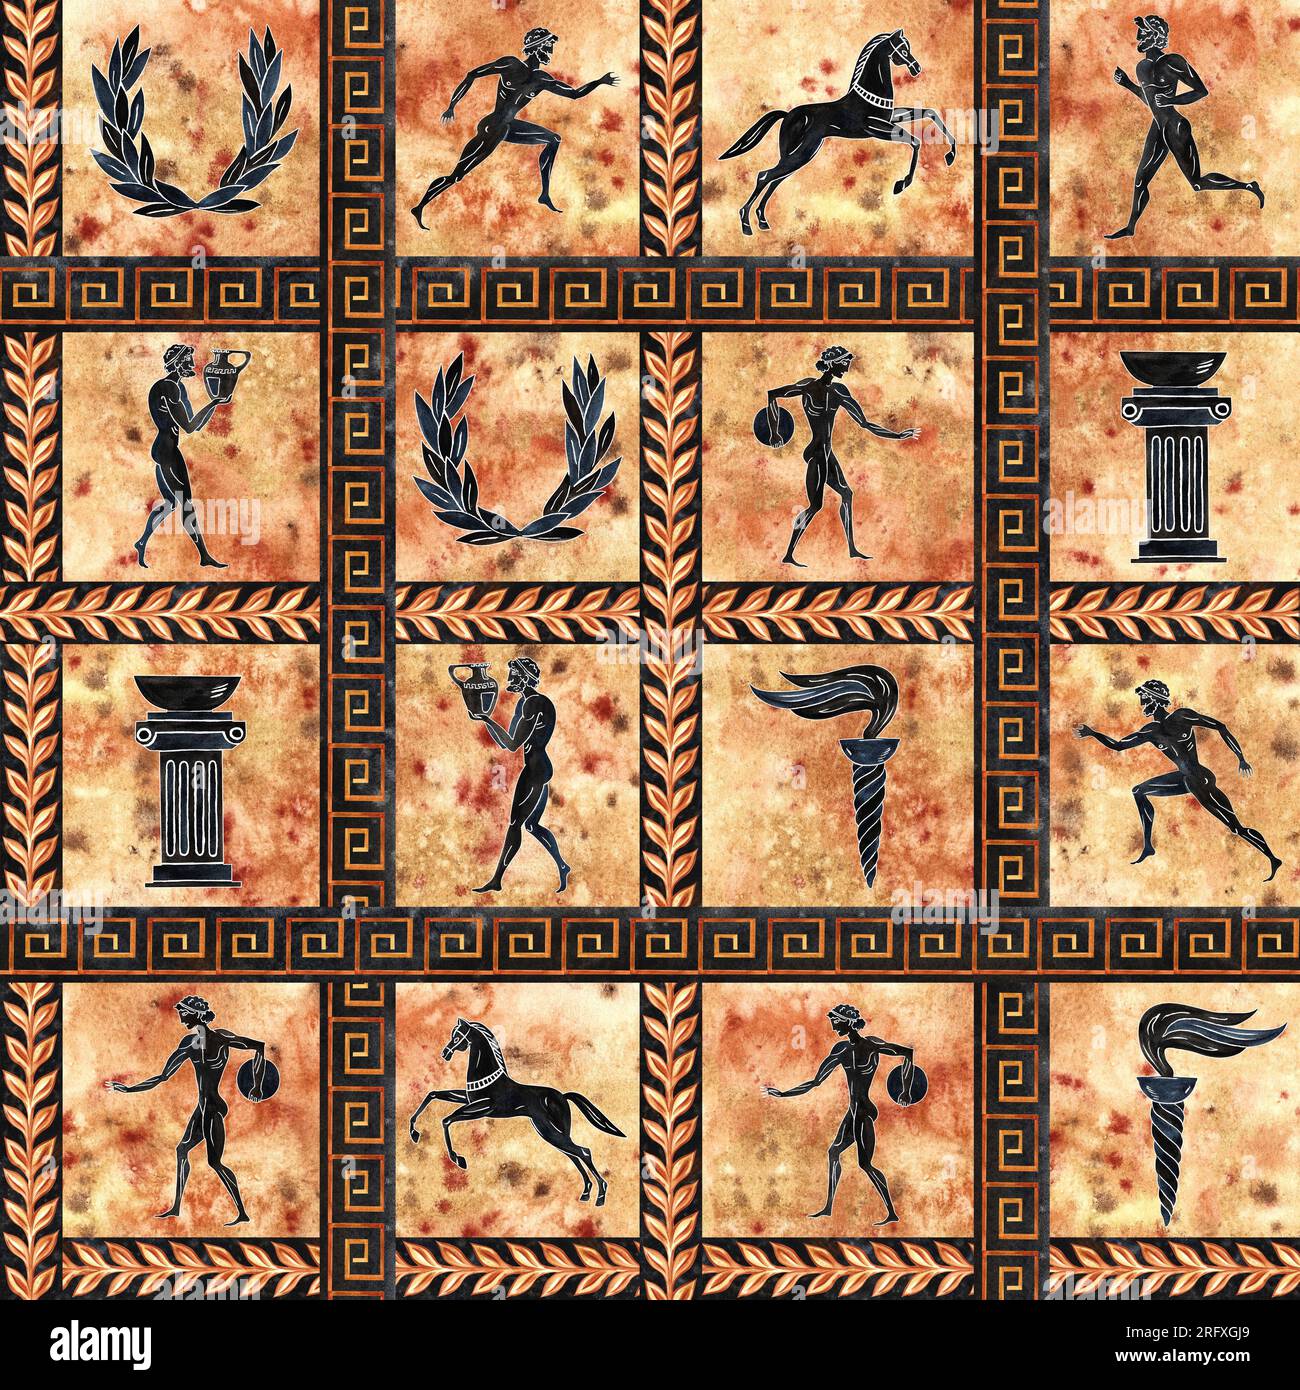 Seamless Checkered Pattern With Ancient Greek Olympic Athletes In The